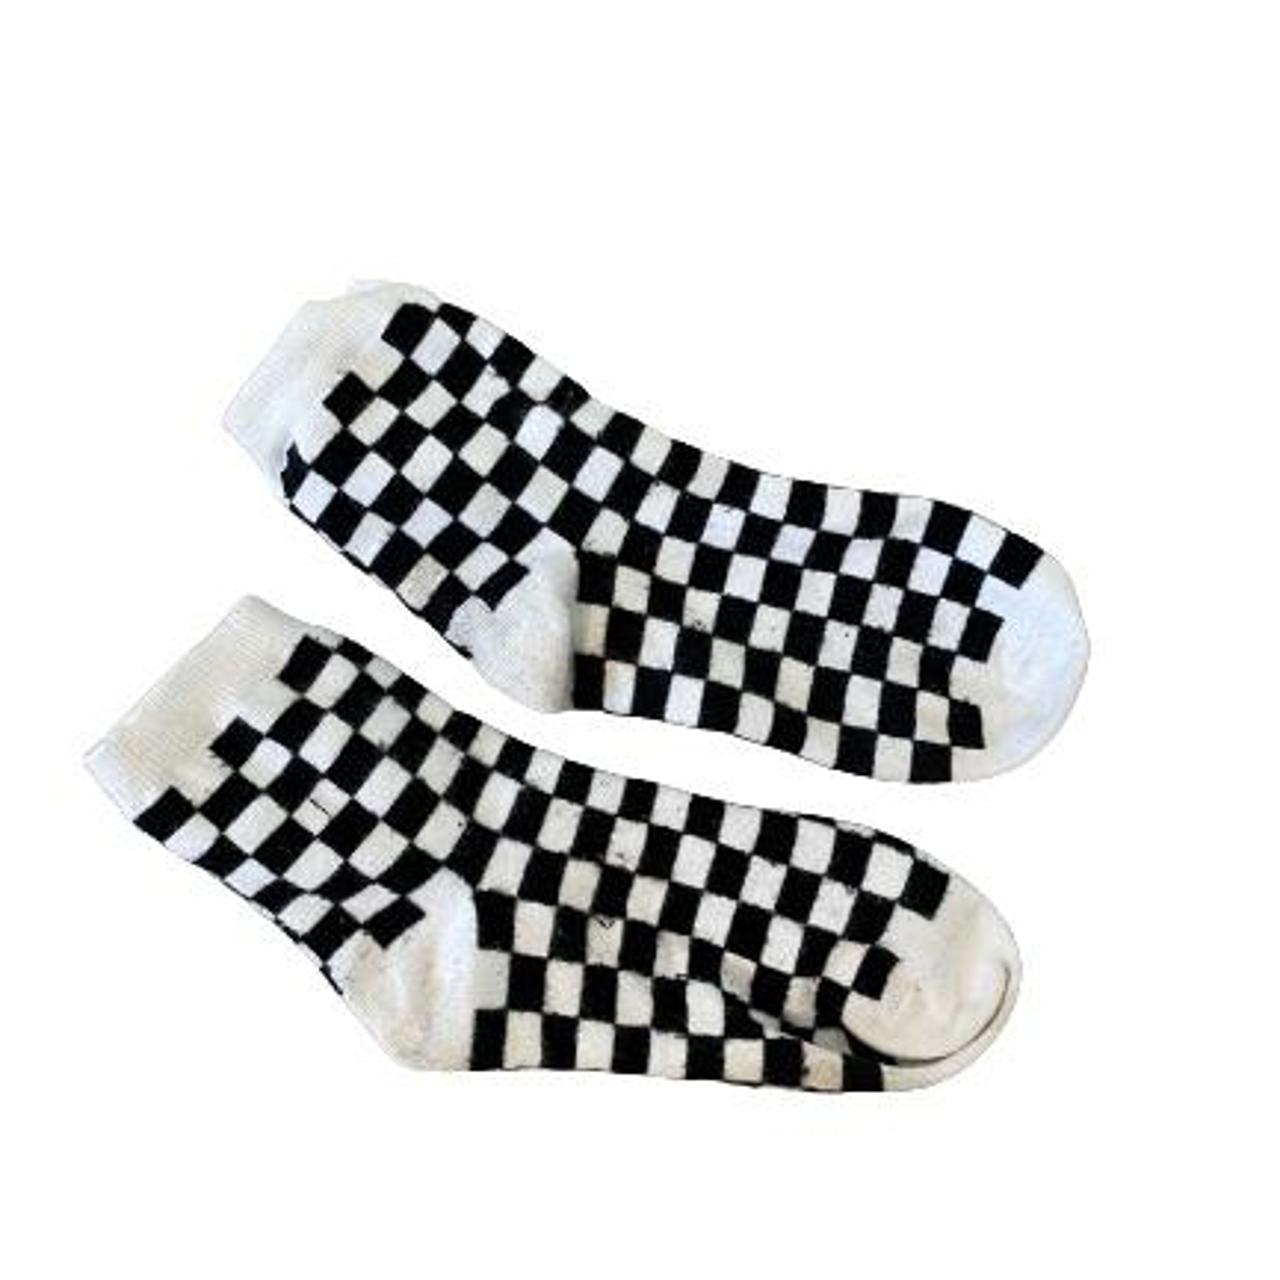 Brandy Melville Women's Black and White Accessory